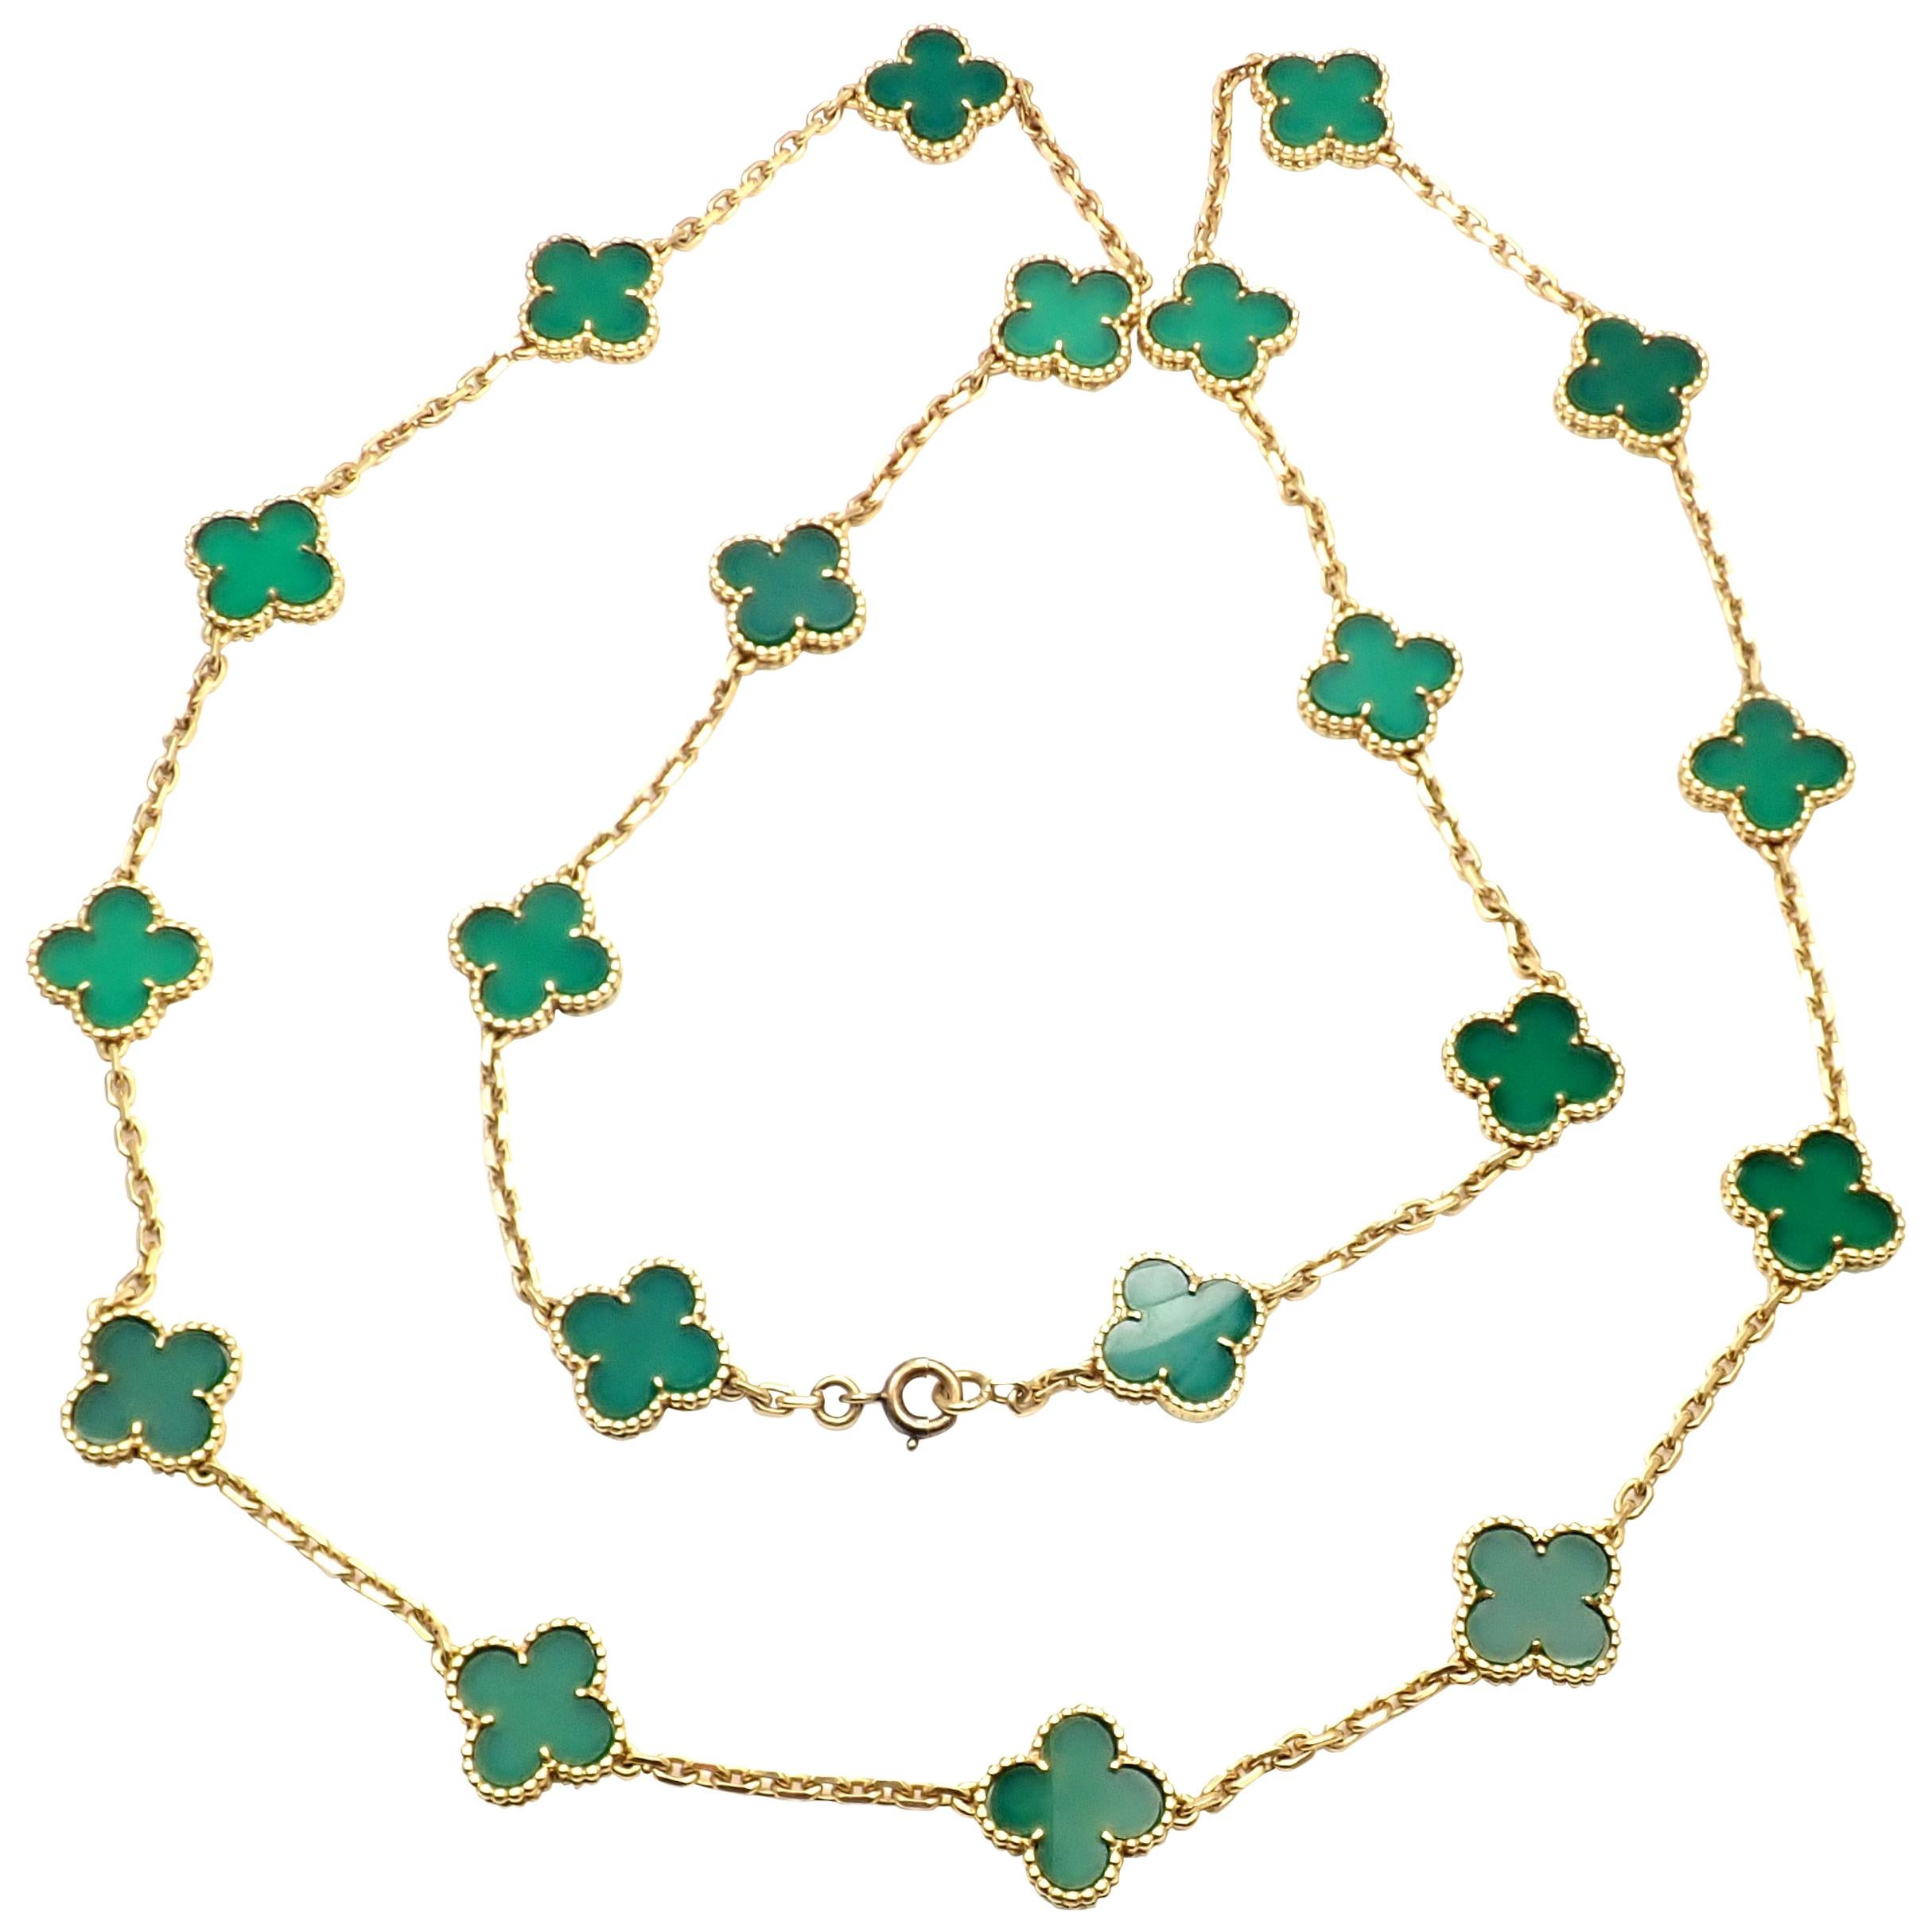 Van Cleef & Arpels 20 Chrysoprase Green Chalcedony Alhambra Yellow Gold Necklace